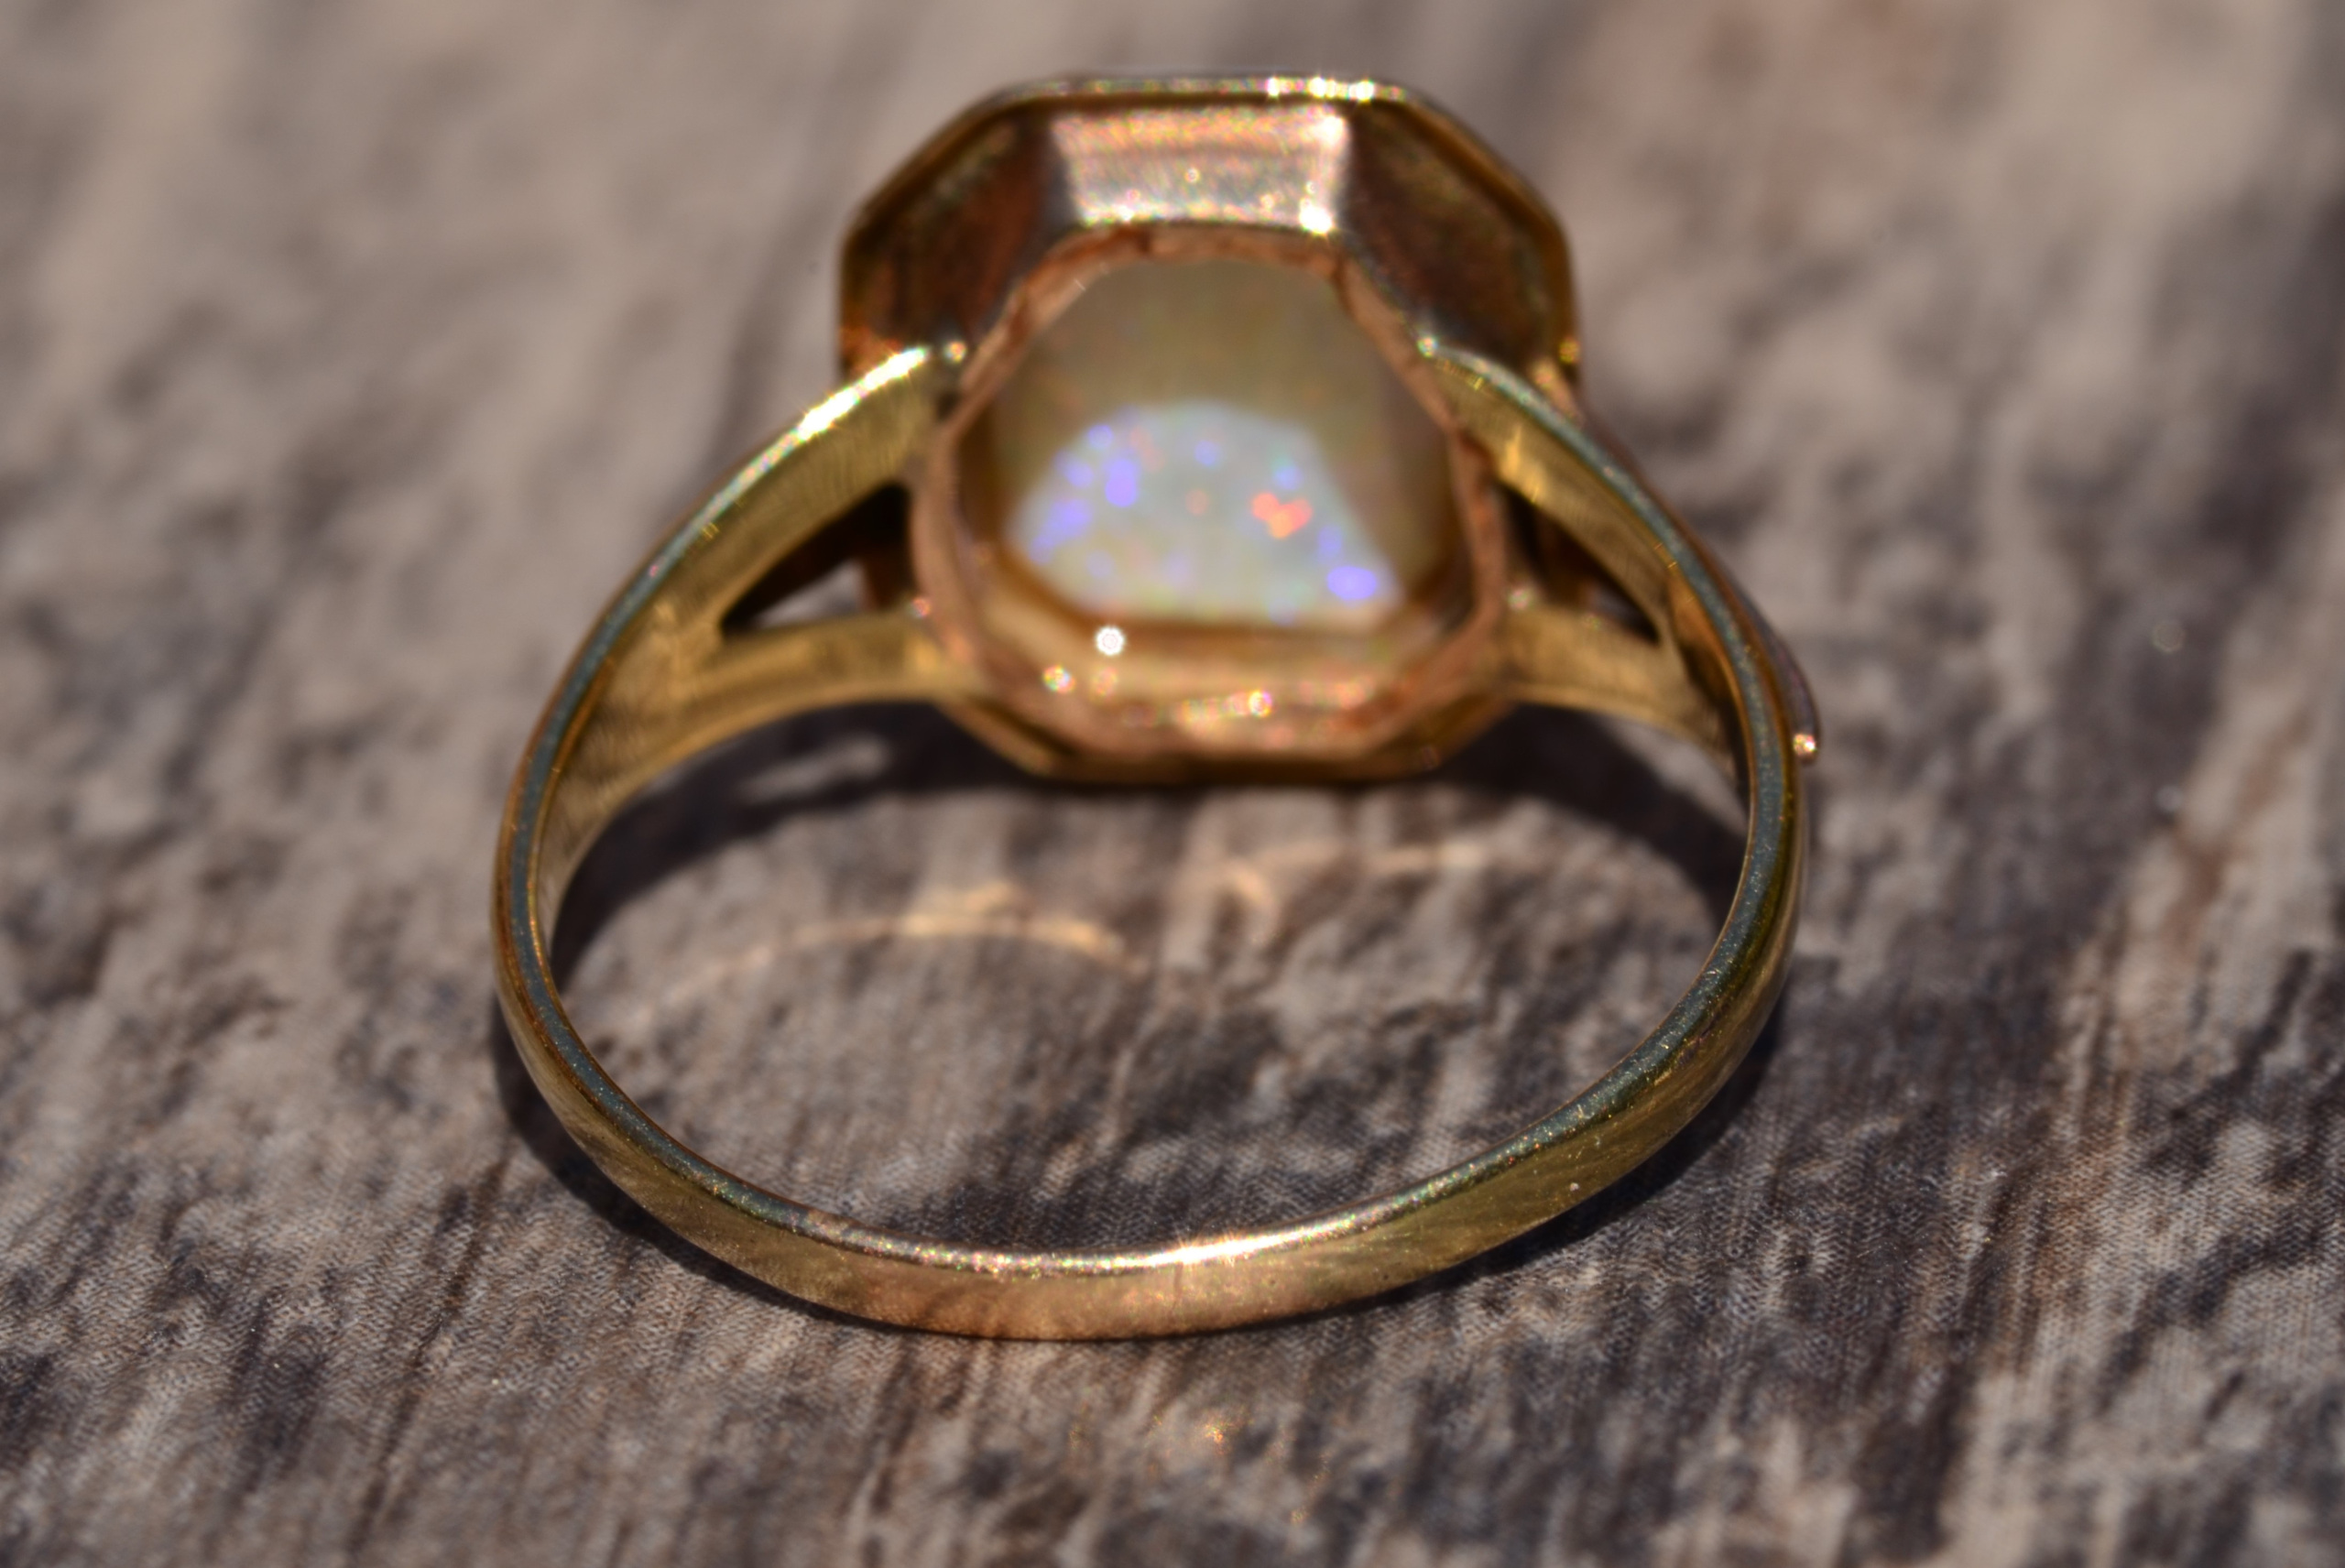 SOLD - The Drumore: Late Art Deco Opal Ring in White and Yellow Gold